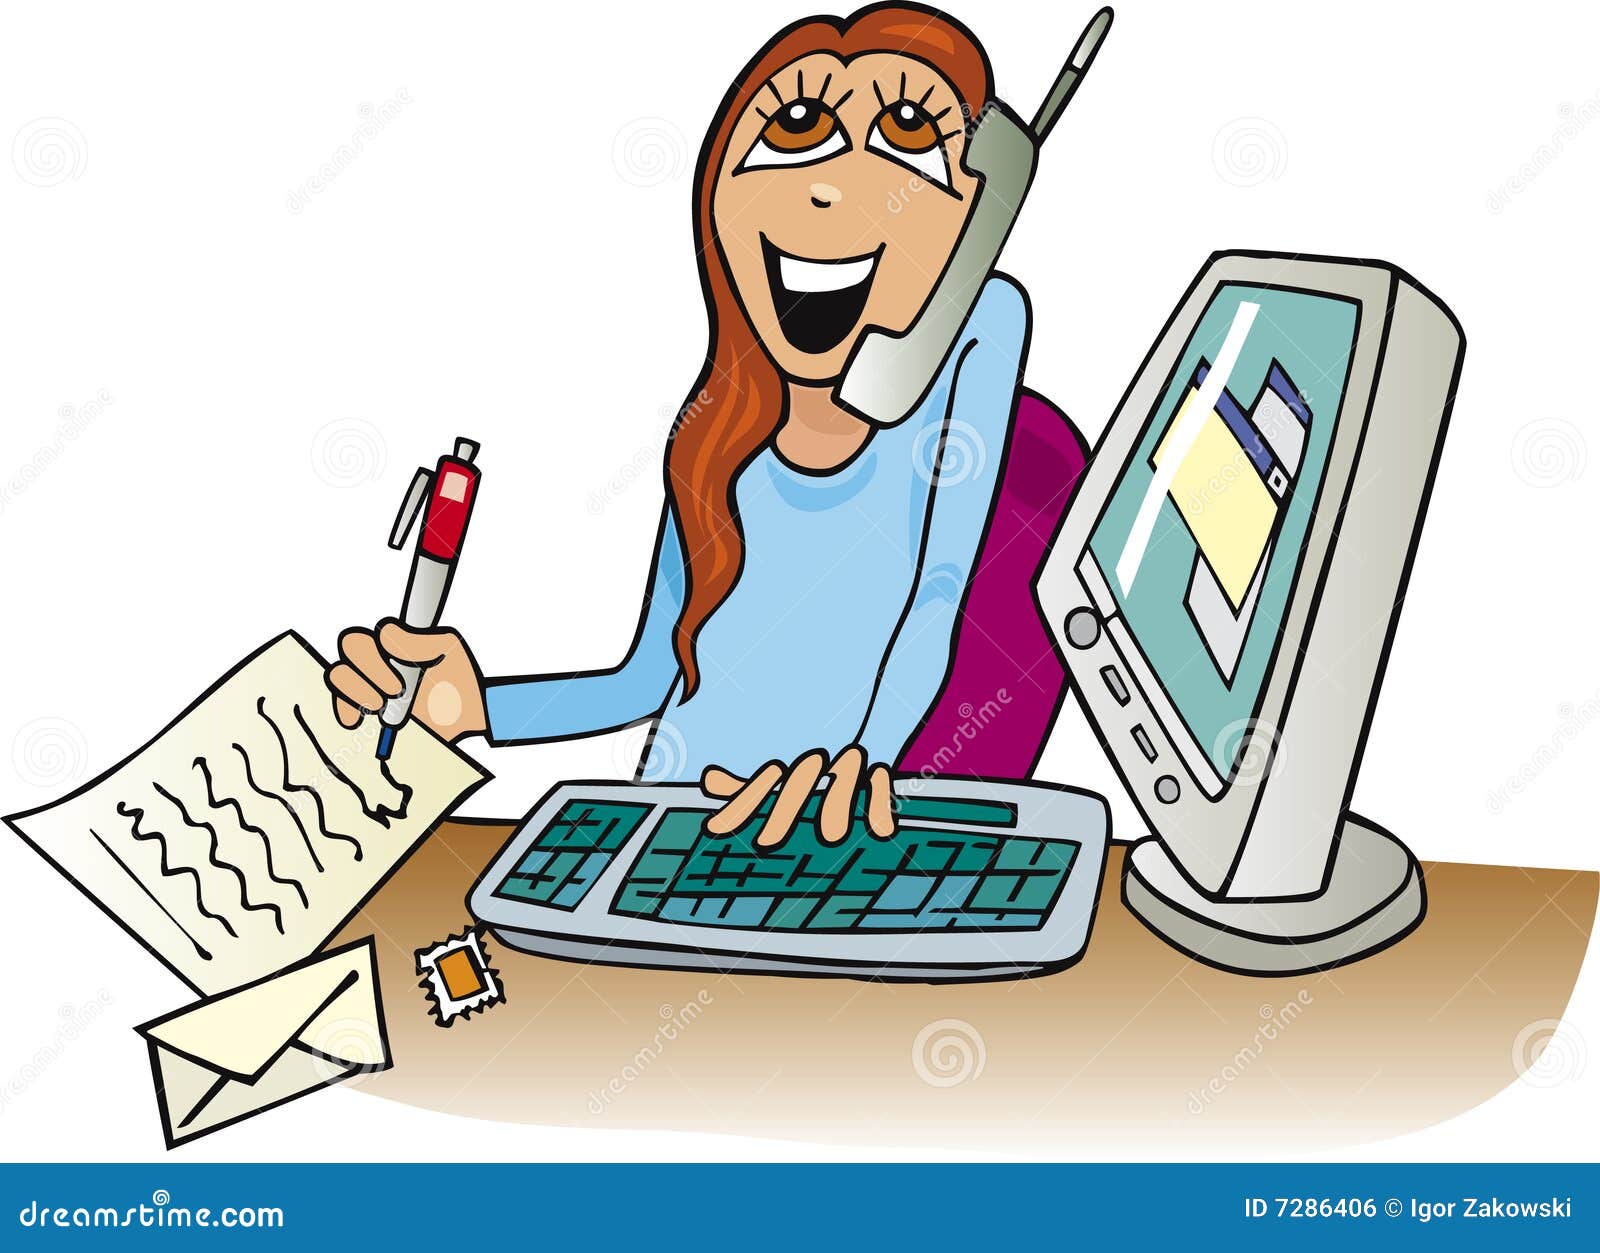 office clipart location - photo #28